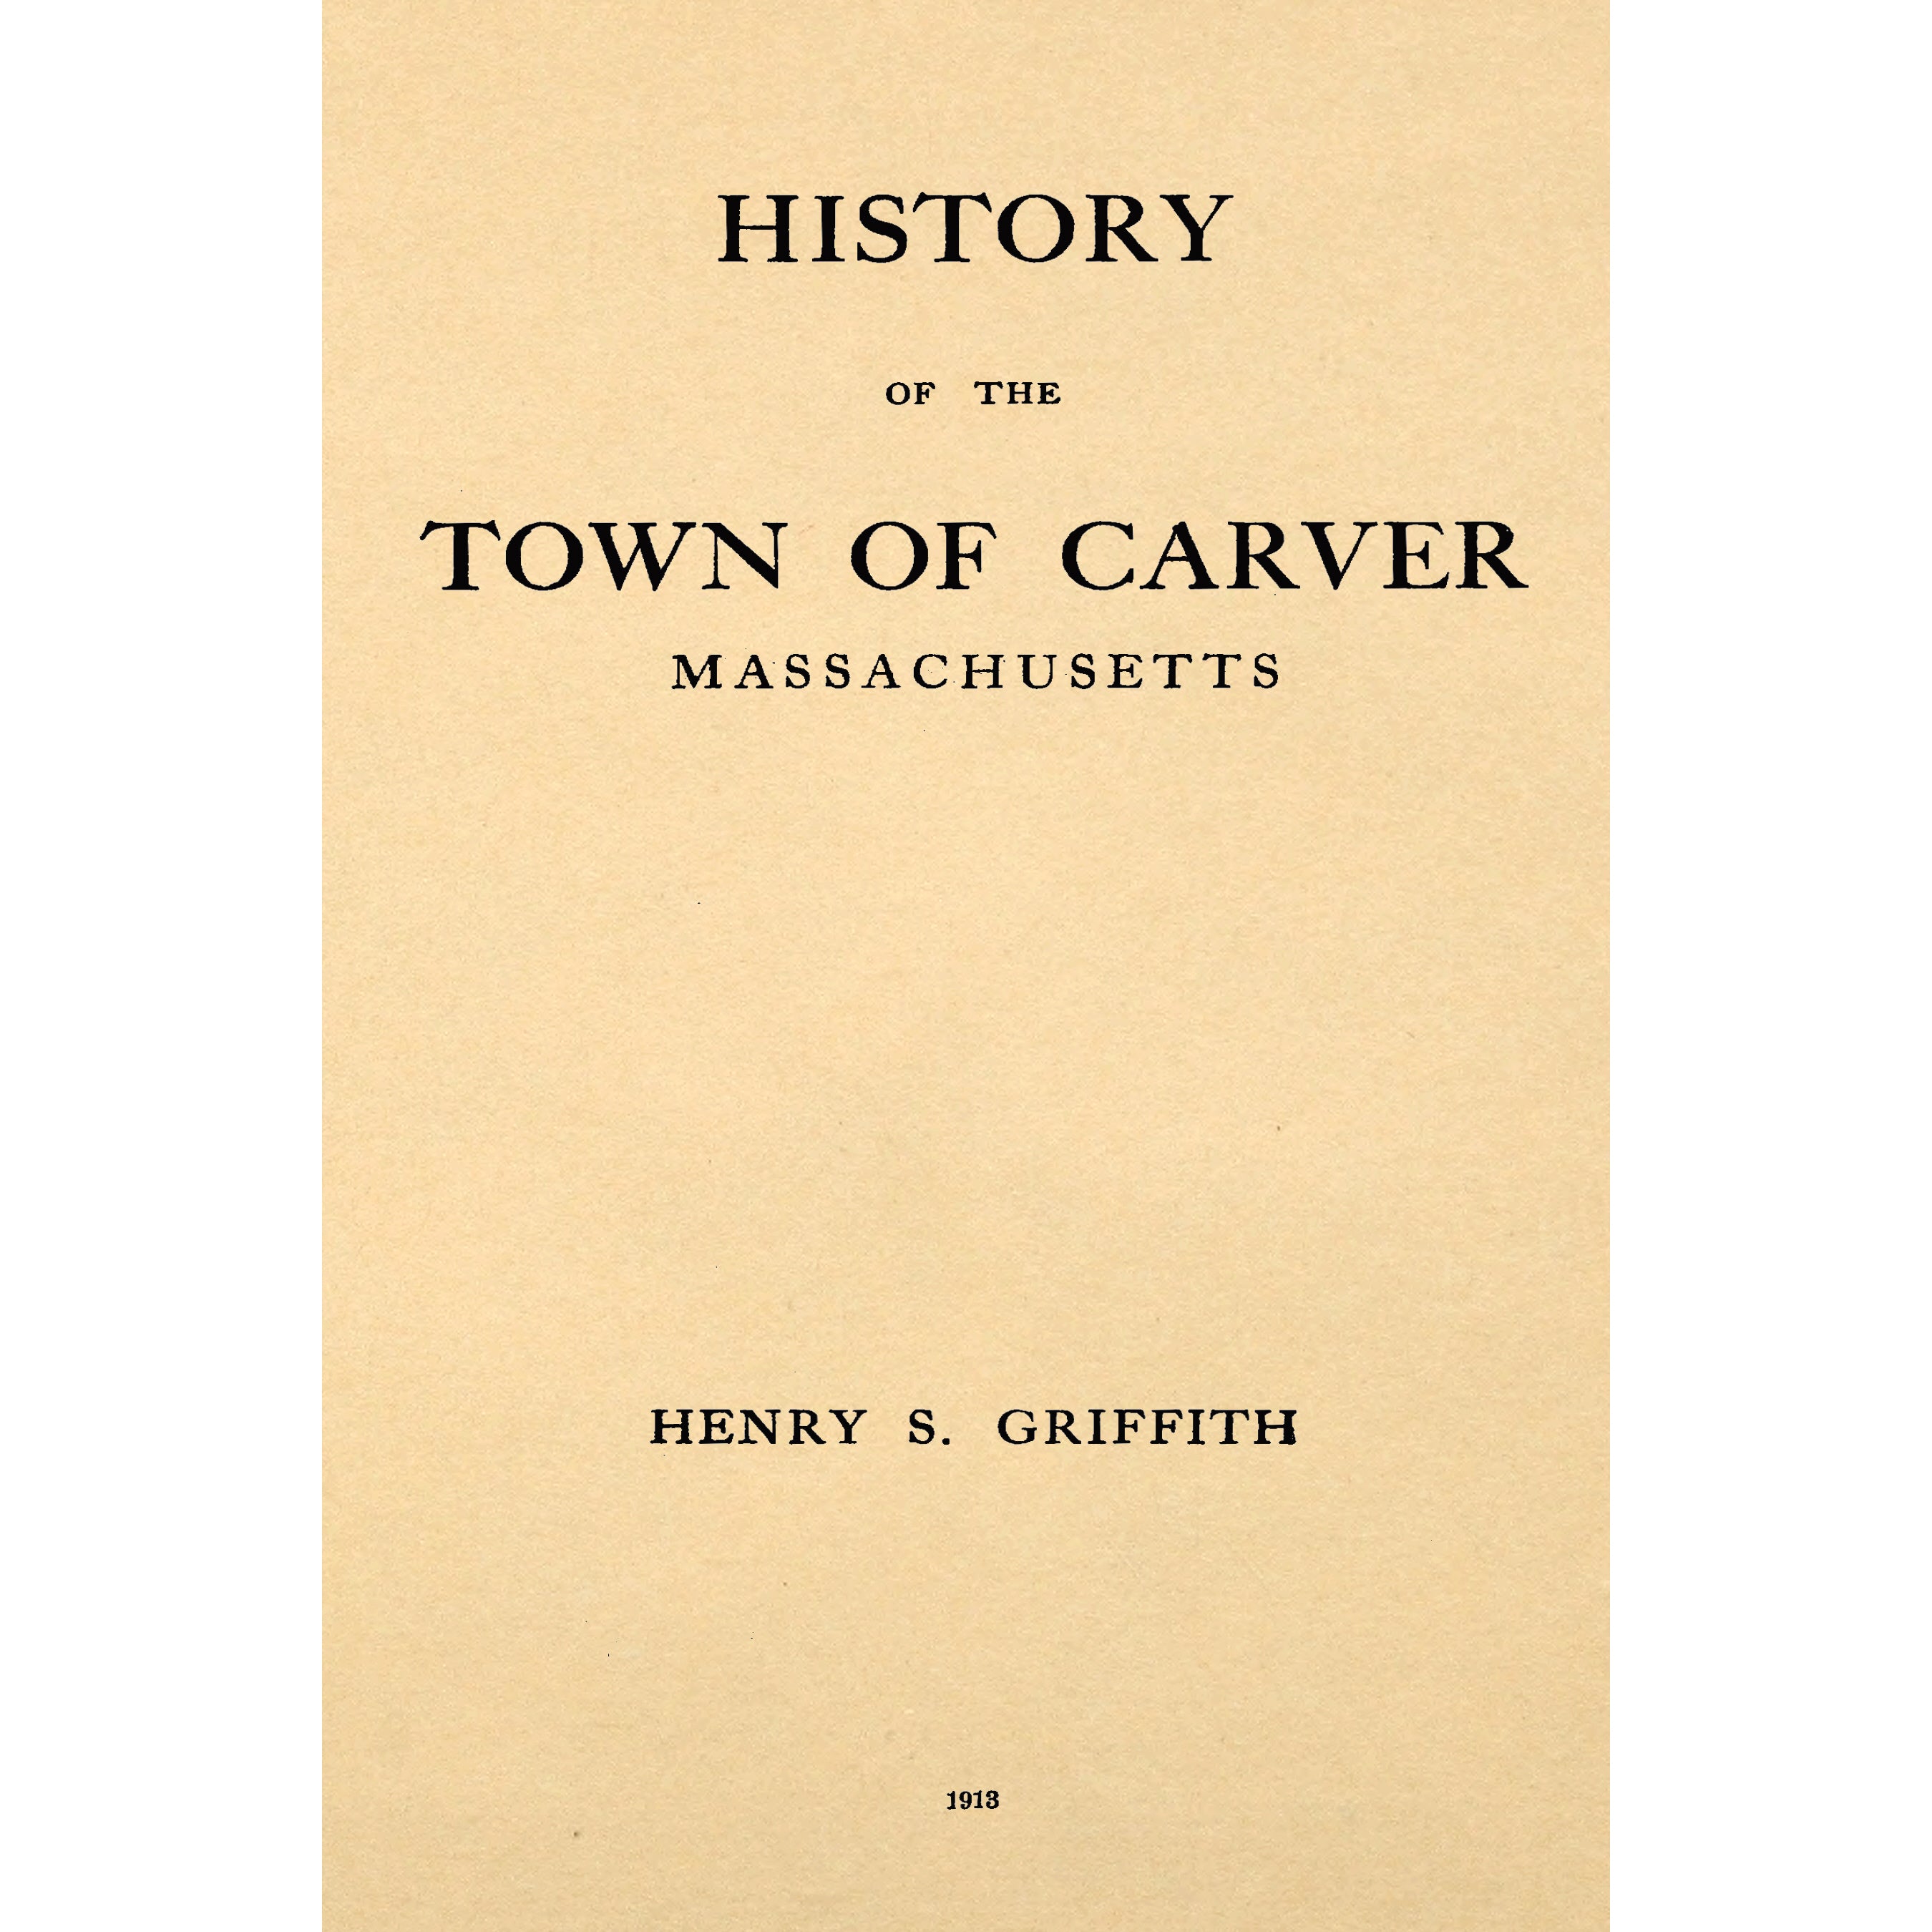 History of the town of Carver, Massachusetts : historical review, 1637-1910